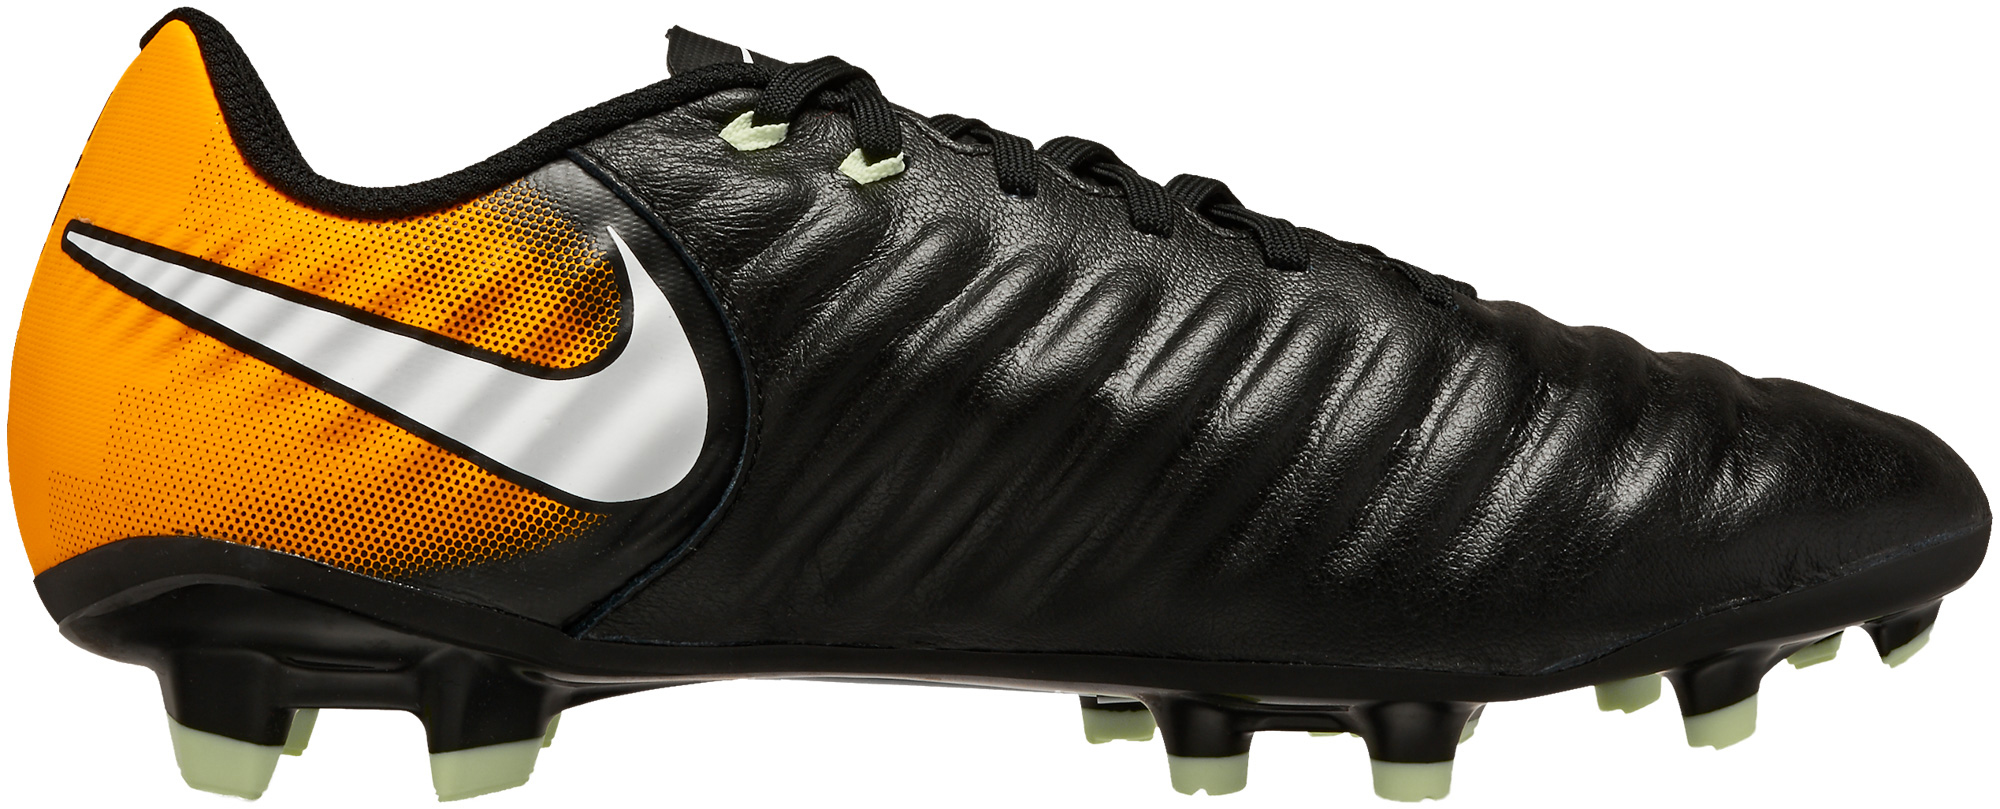 Nike Tiempo Ligera IV FG - Black and Laser Nike Soccer Cleats